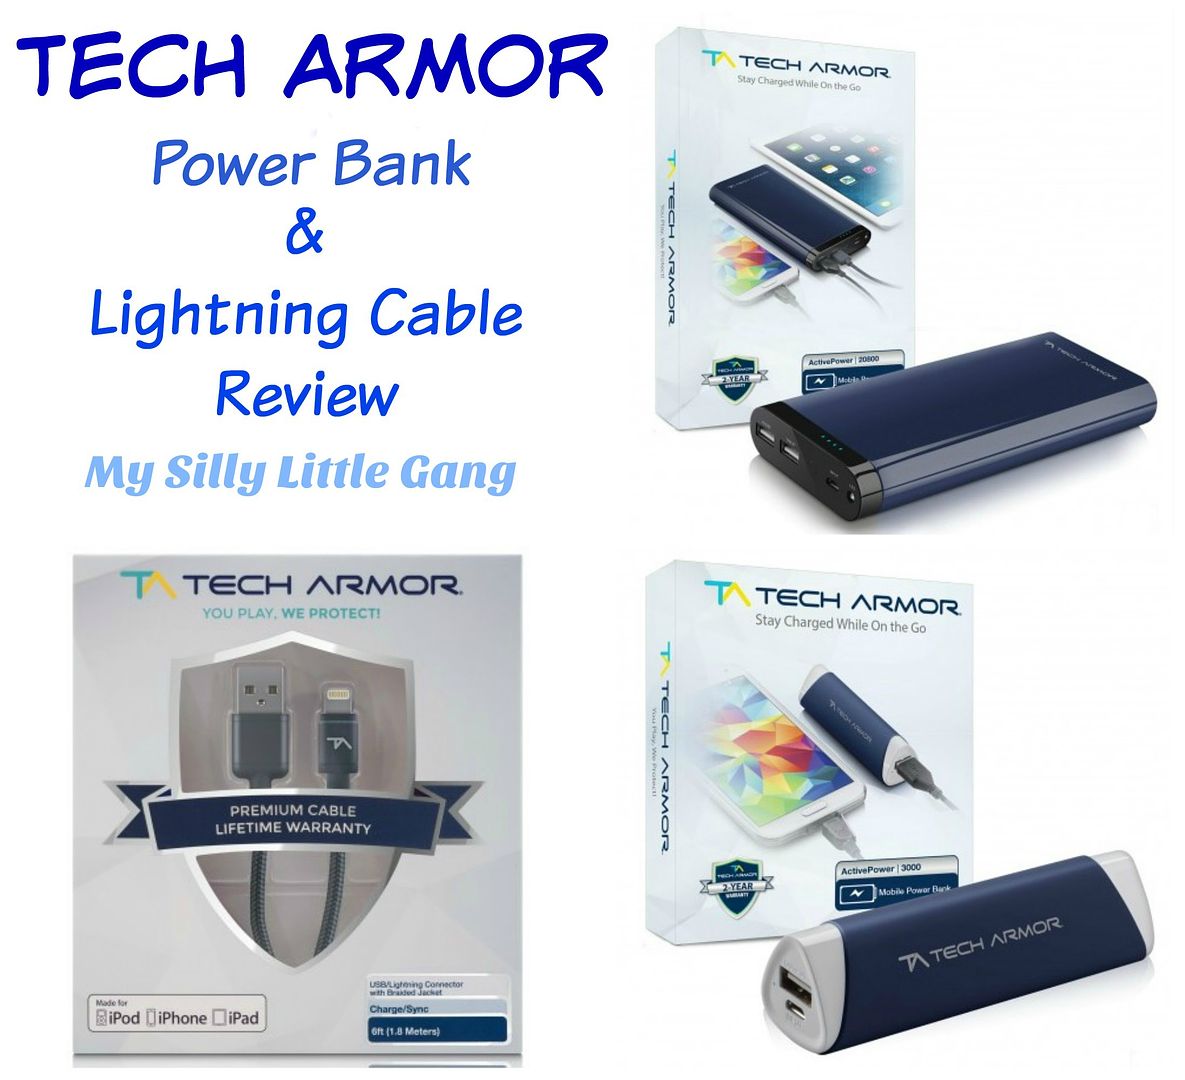 Tech Armor Power Banks & Lightening Cable Review